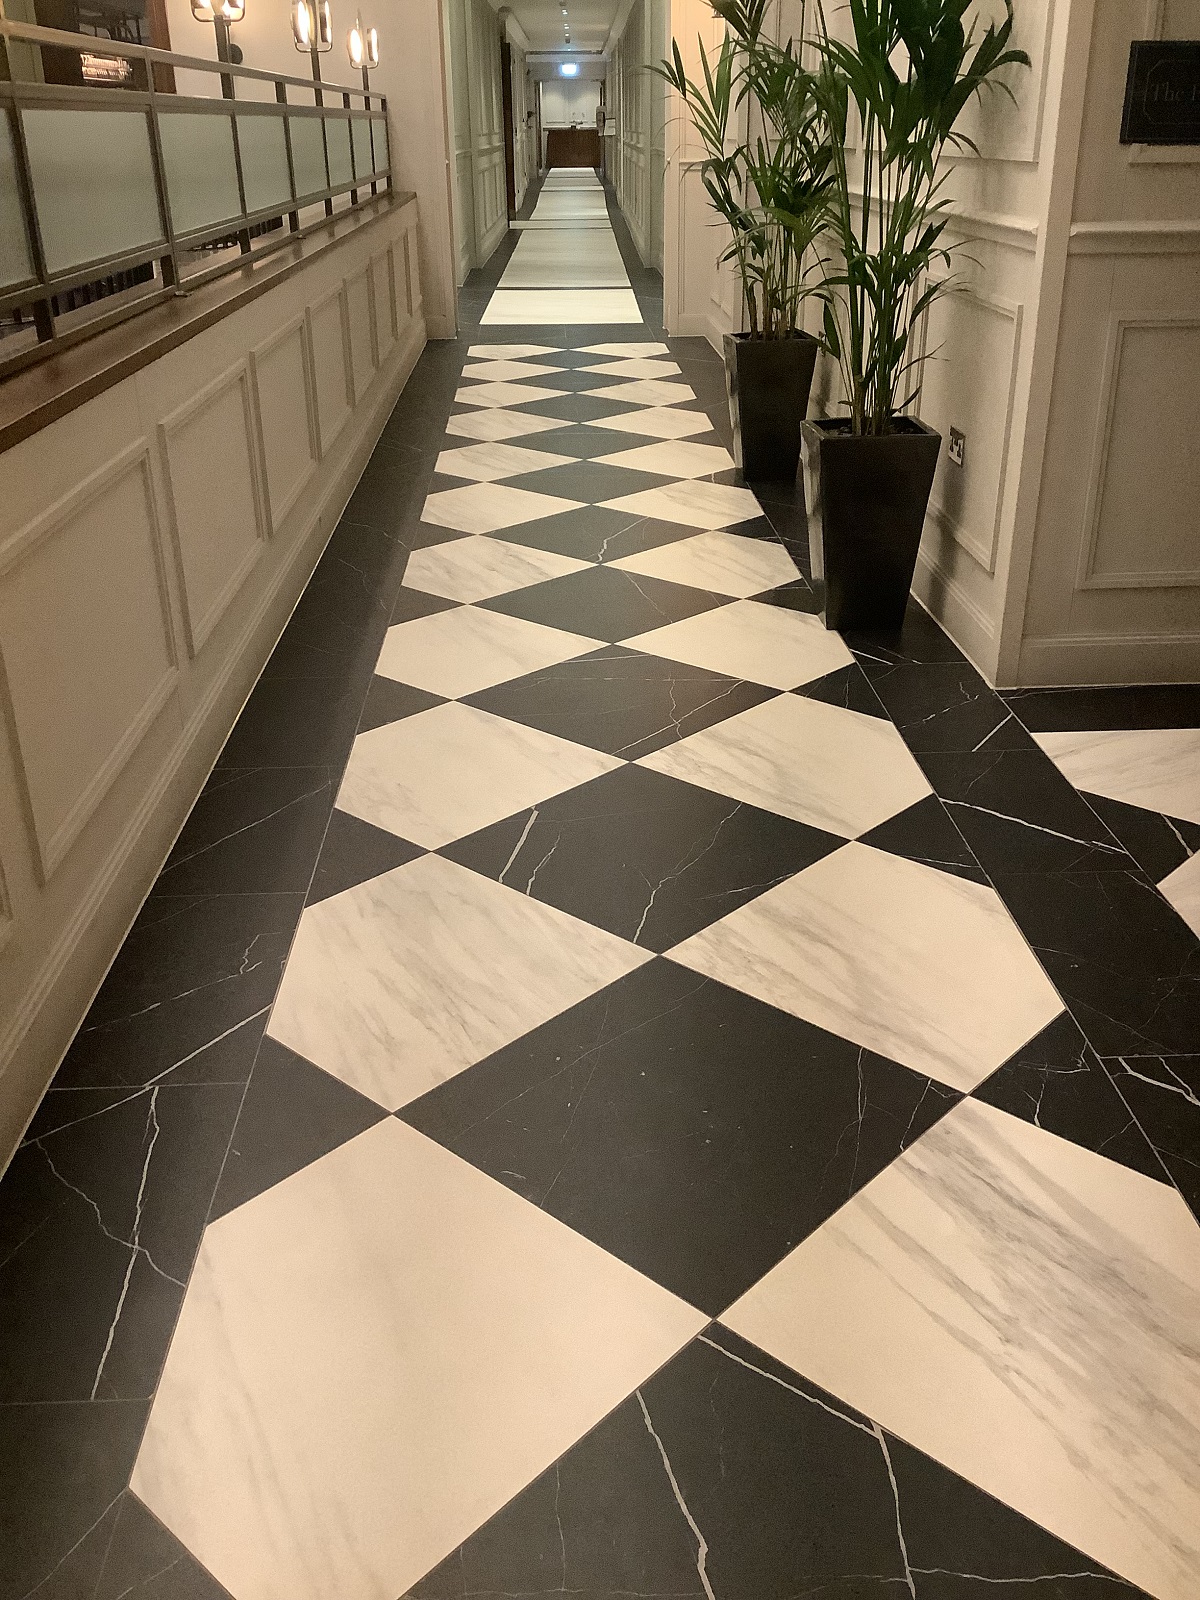 Black and white Victorian-inspired tiles pay homage to the heritage of the surrounding area in this cardiff hotel